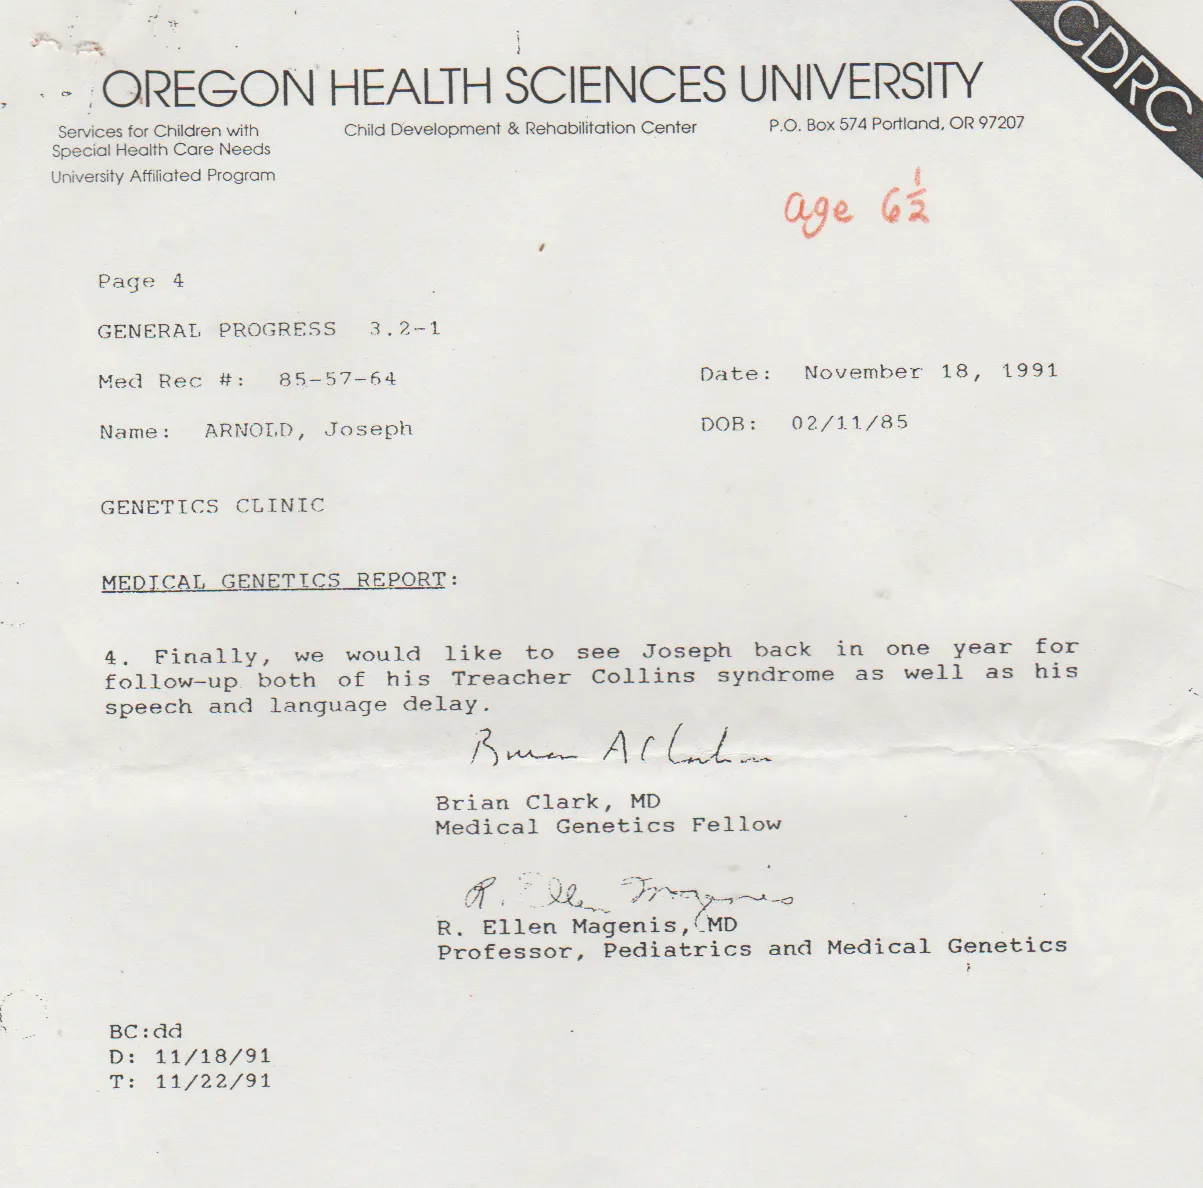 1991-11-18 - Monday - Evaluation of Joey Arnold by some MDs - Oregon Health Sciences University, Portland, OR - 4pages-4.png